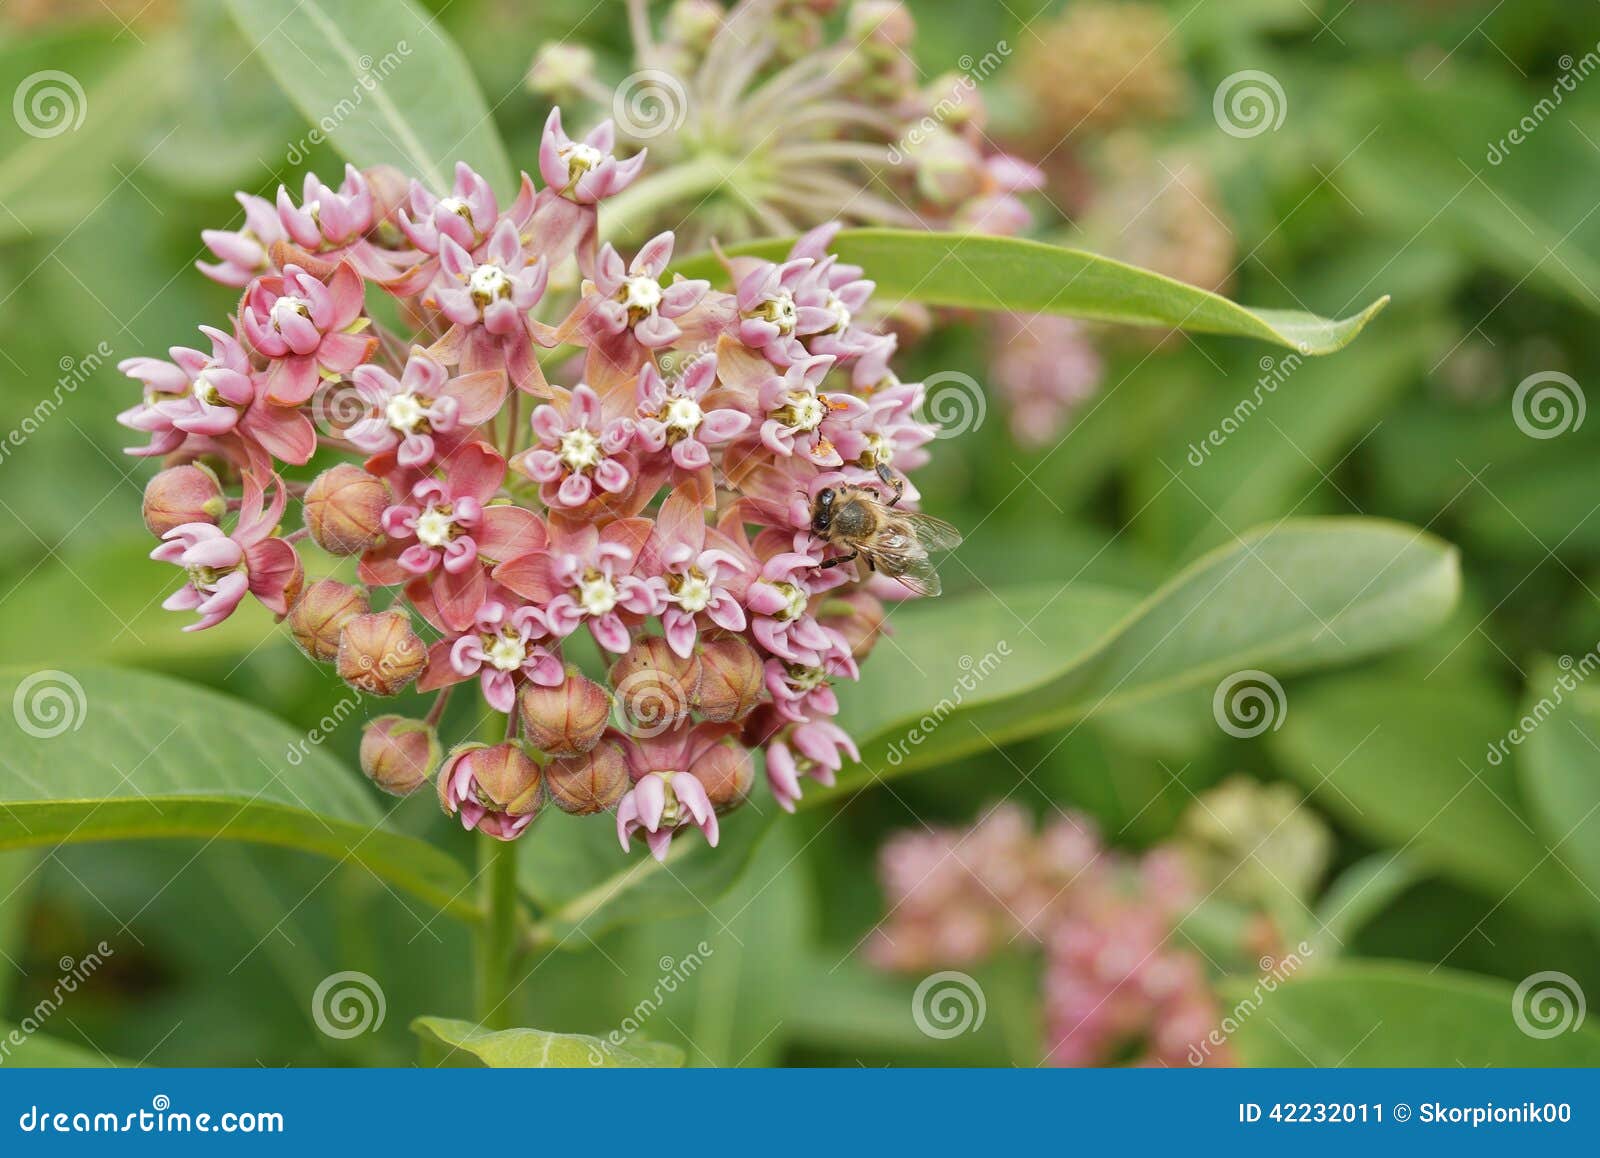 asclepias syriaca and working bees